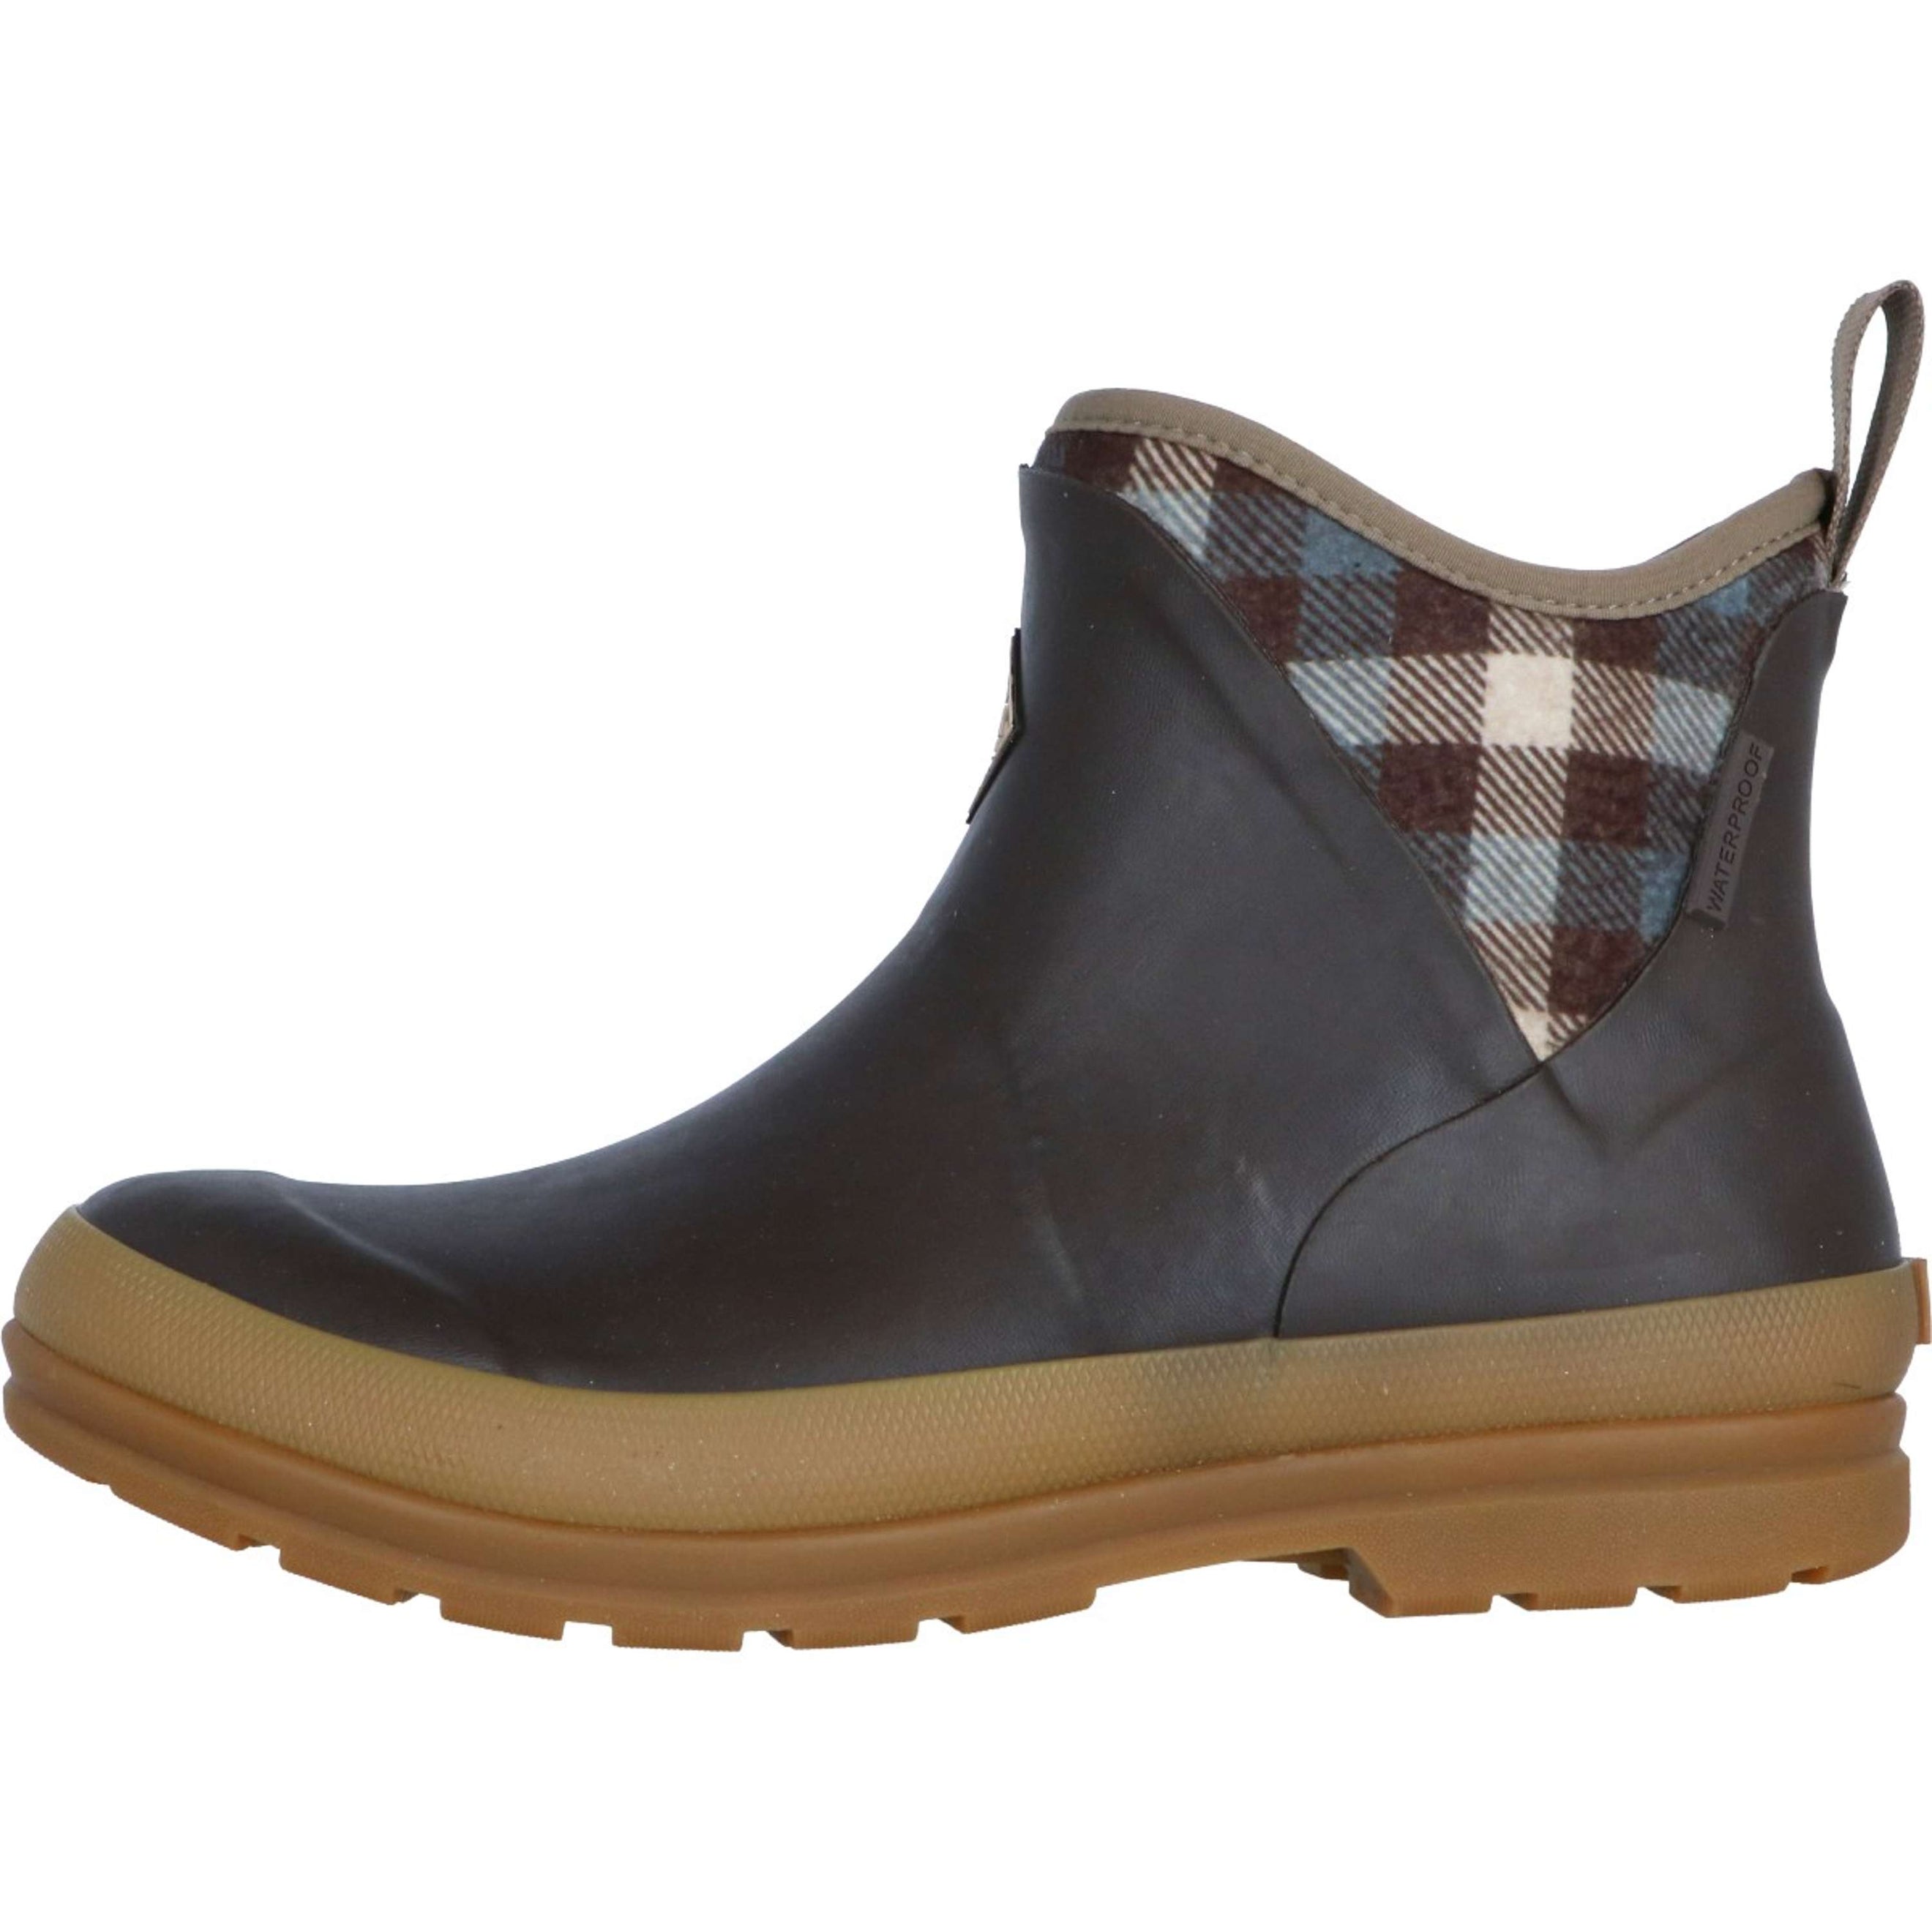 Muck Boot Originals Pull On Ankle Marron/Plaid